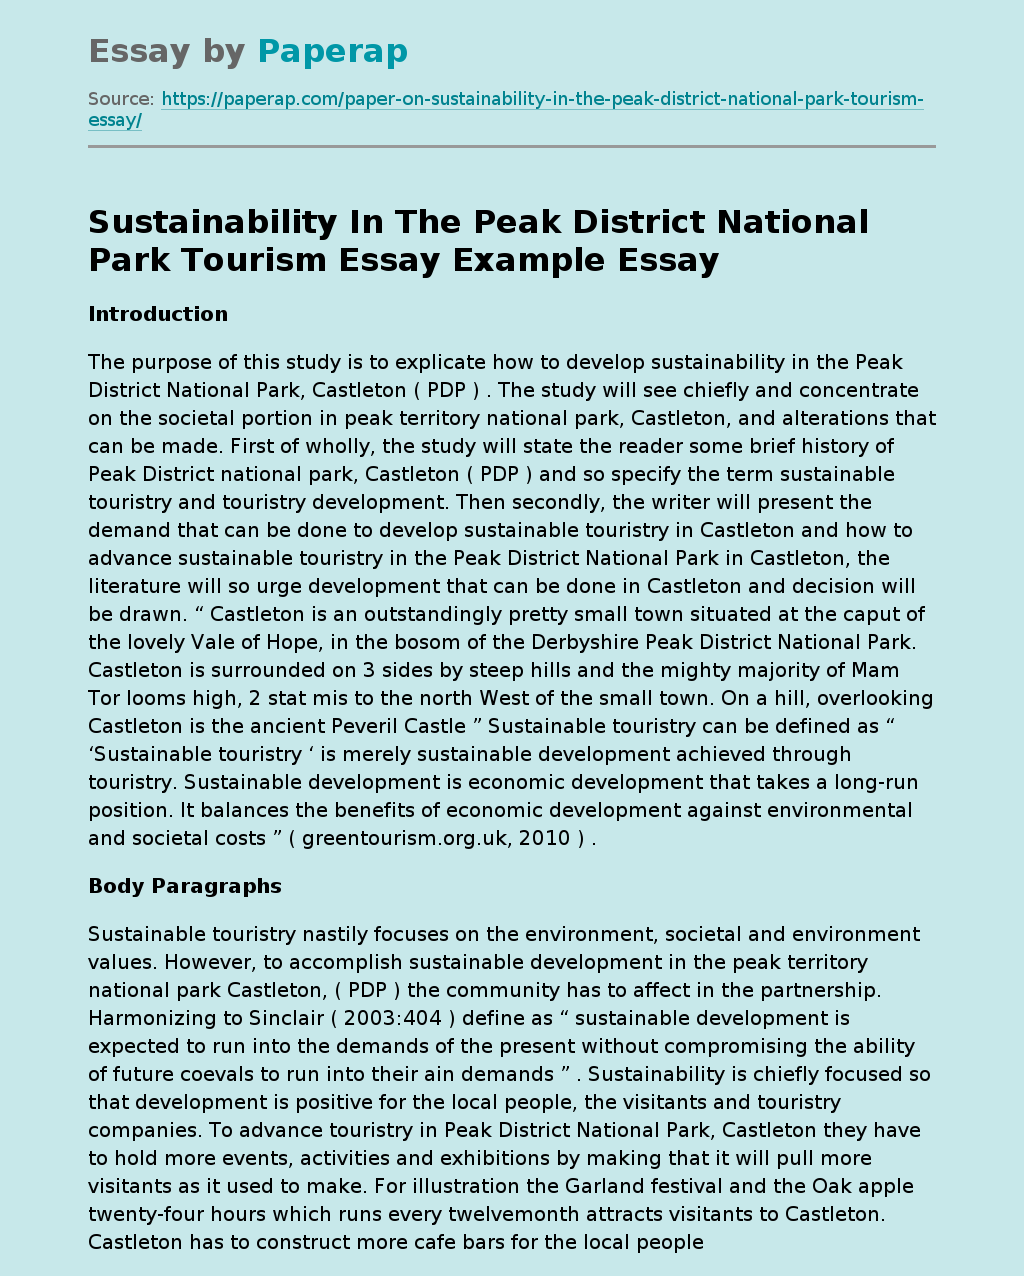 Sustainability In The Peak District National Park Tourism Essay Example